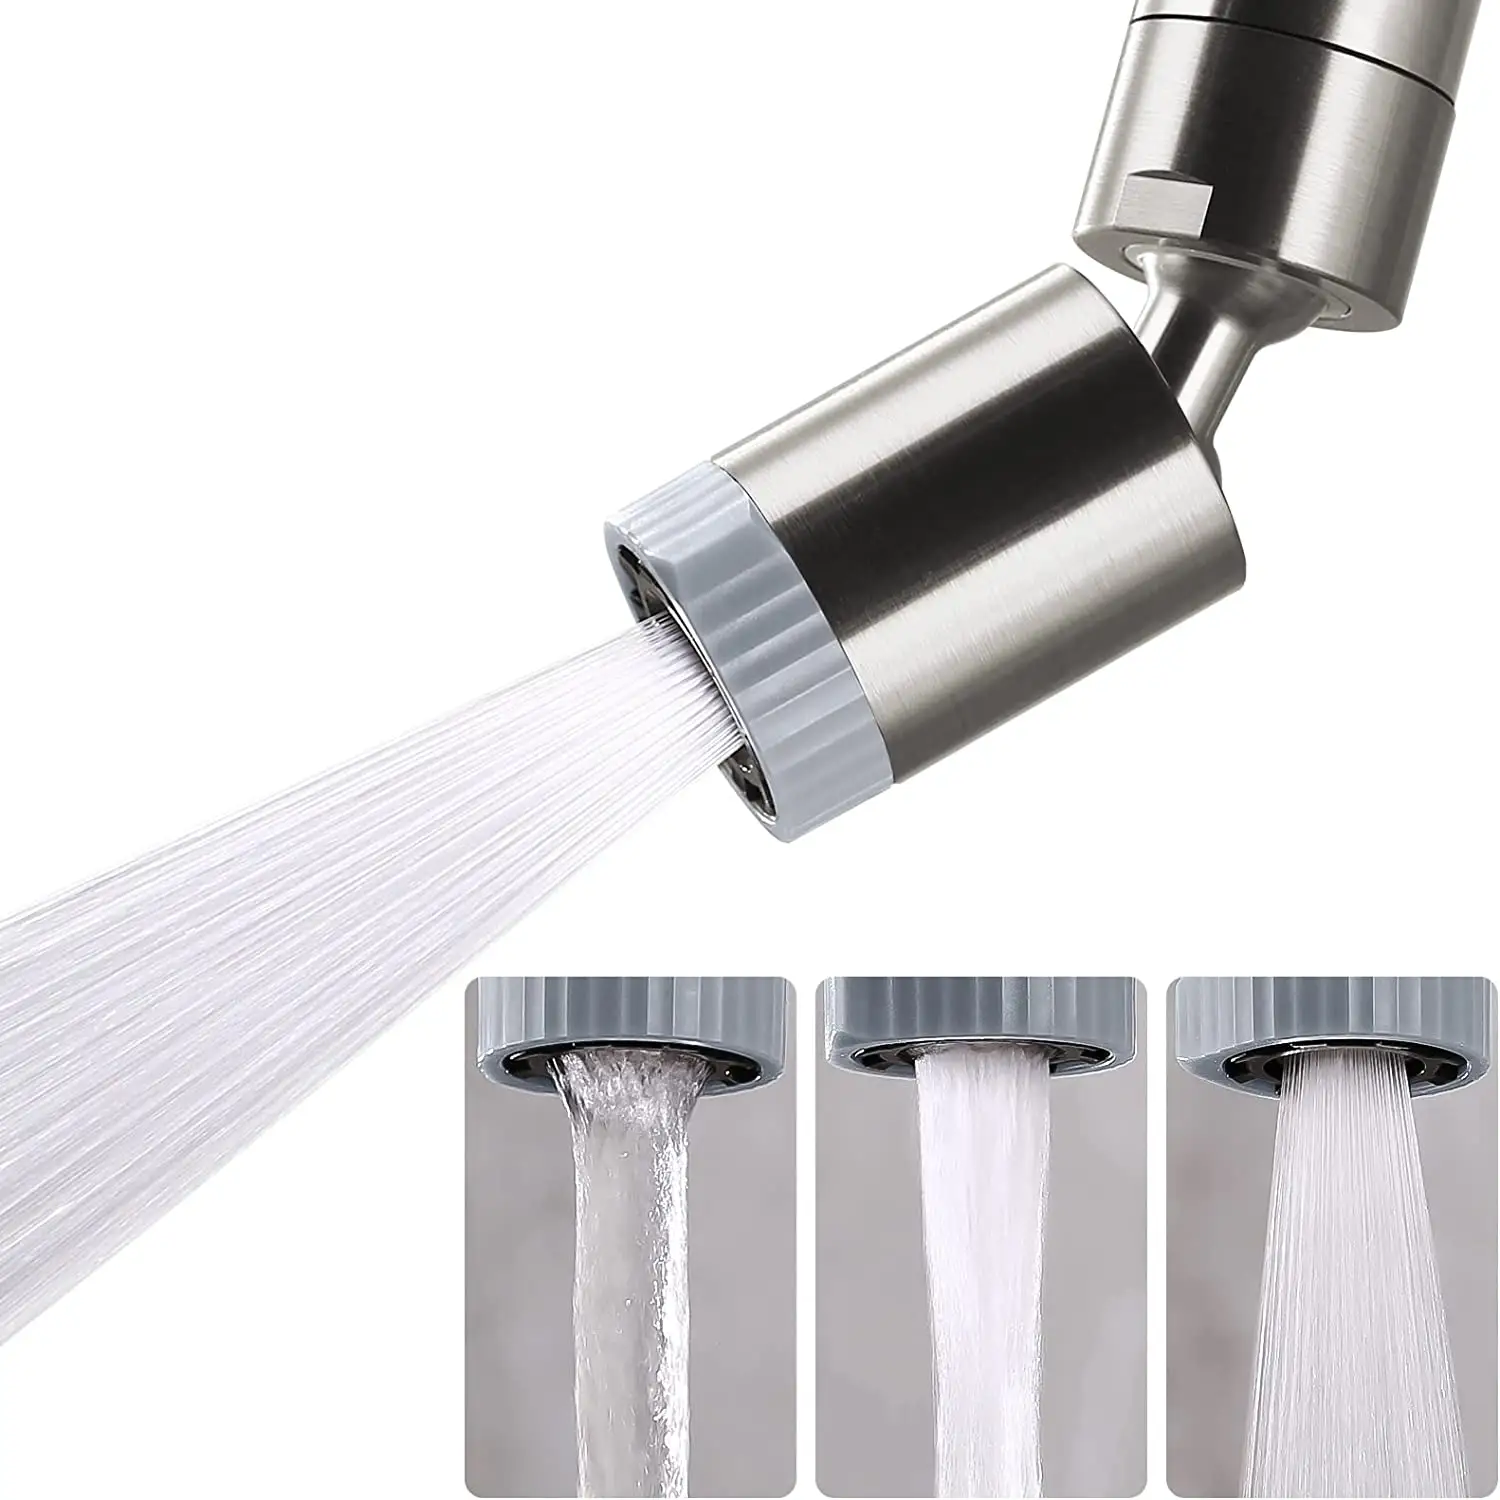 Universal Sink Faucet Spray Head Attachment for Kitchen and Bathroom Chrome Plated